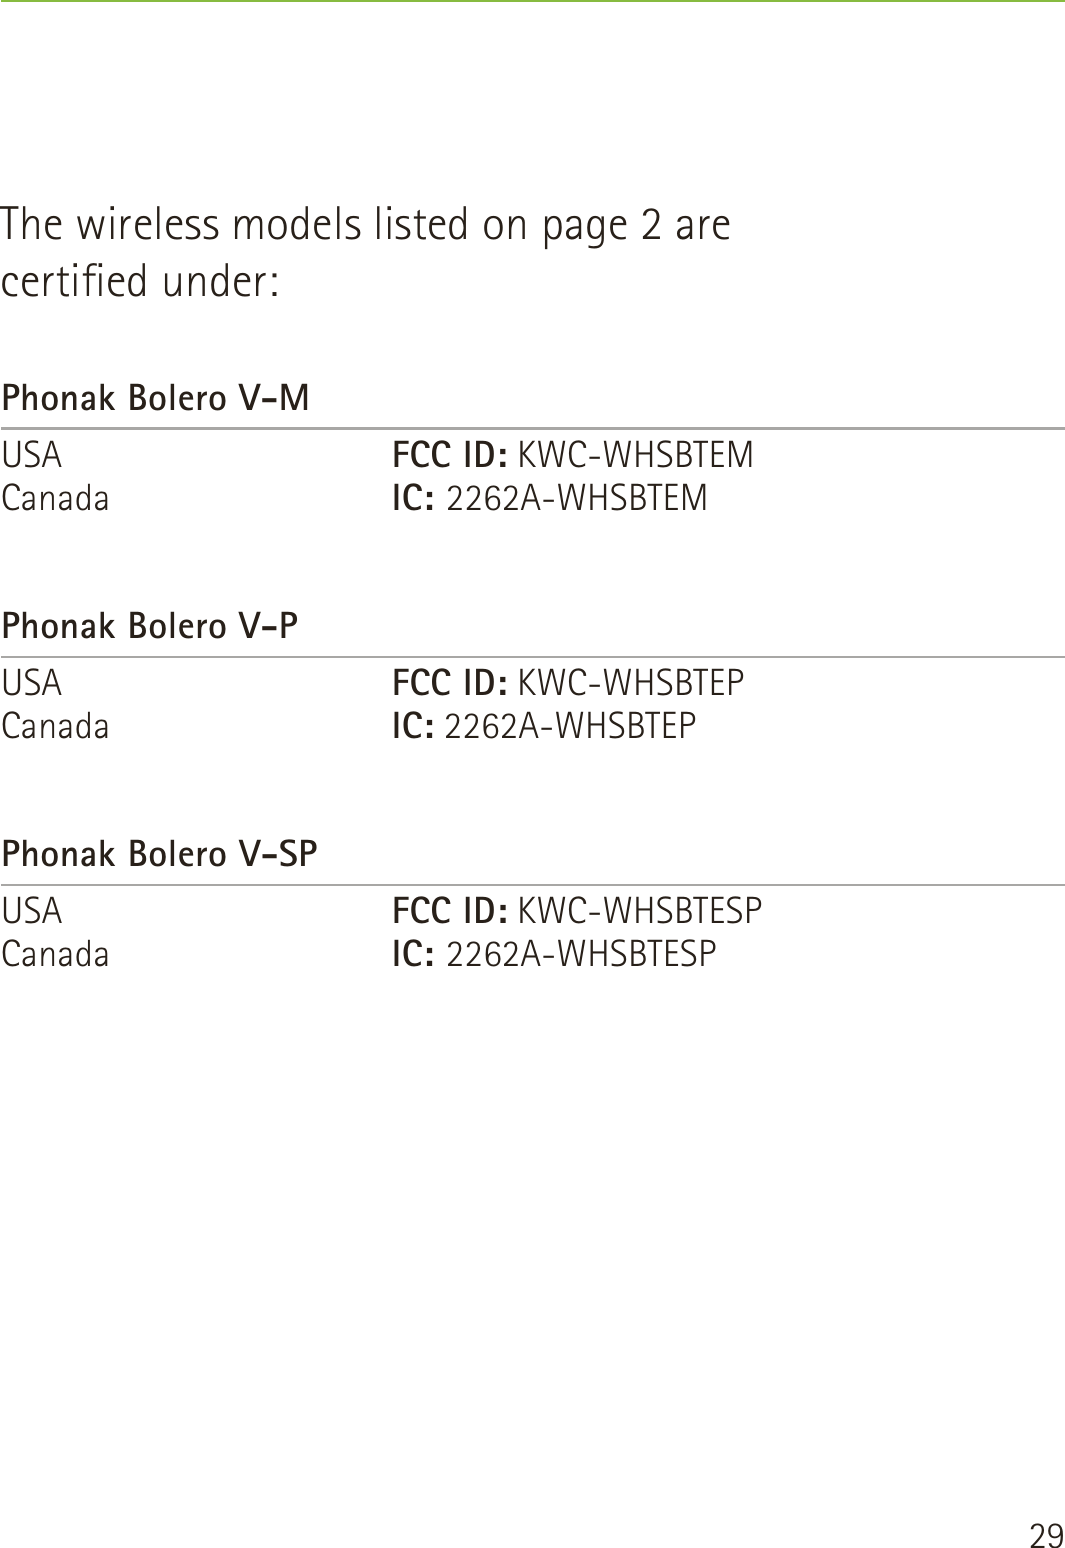 29The wireless models listed on page 2 are  certied under:Phonak Bolero V-MUSA   FCC ID: KWC-WHSBTEM Canada   IC: 2262A-WHSBTEMPhonak Bolero V-PUSA   FCC ID: KWC-WHSBTEP Canada   IC: 2262A-WHSBTEPPhonak Bolero V-SPUSA   FCC ID: KWC-WHSBTESP Canada   IC: 2262A-WHSBTESP